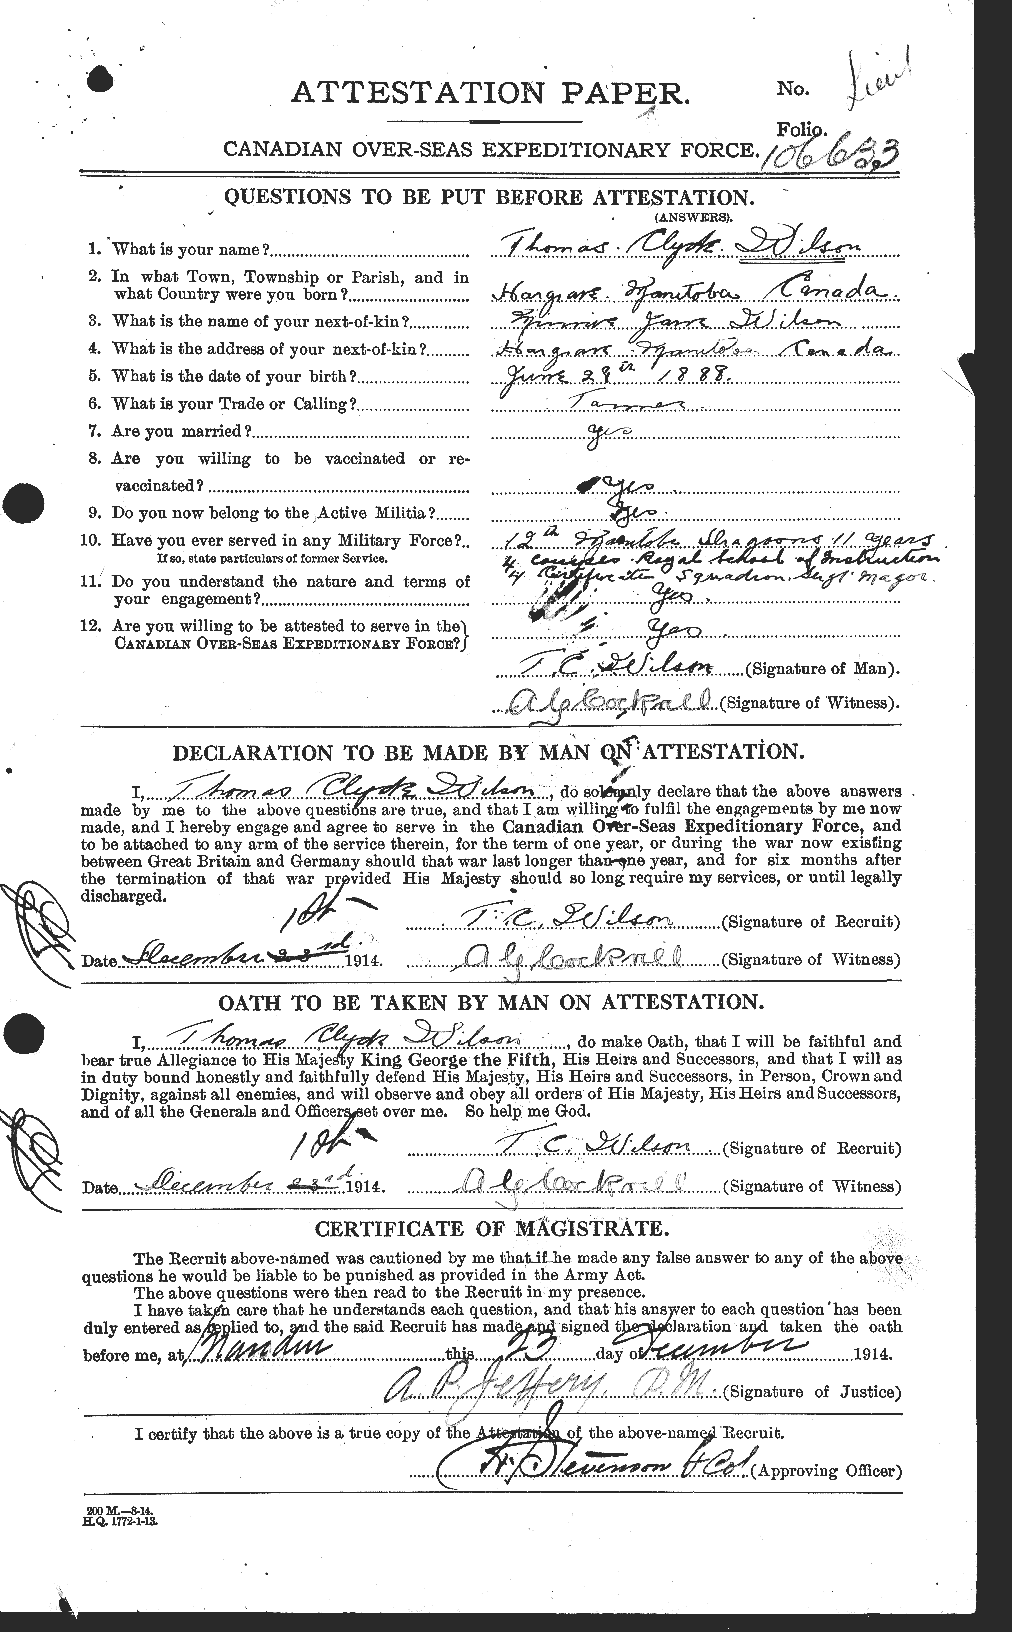 Personnel Records of the First World War - CEF 681248a